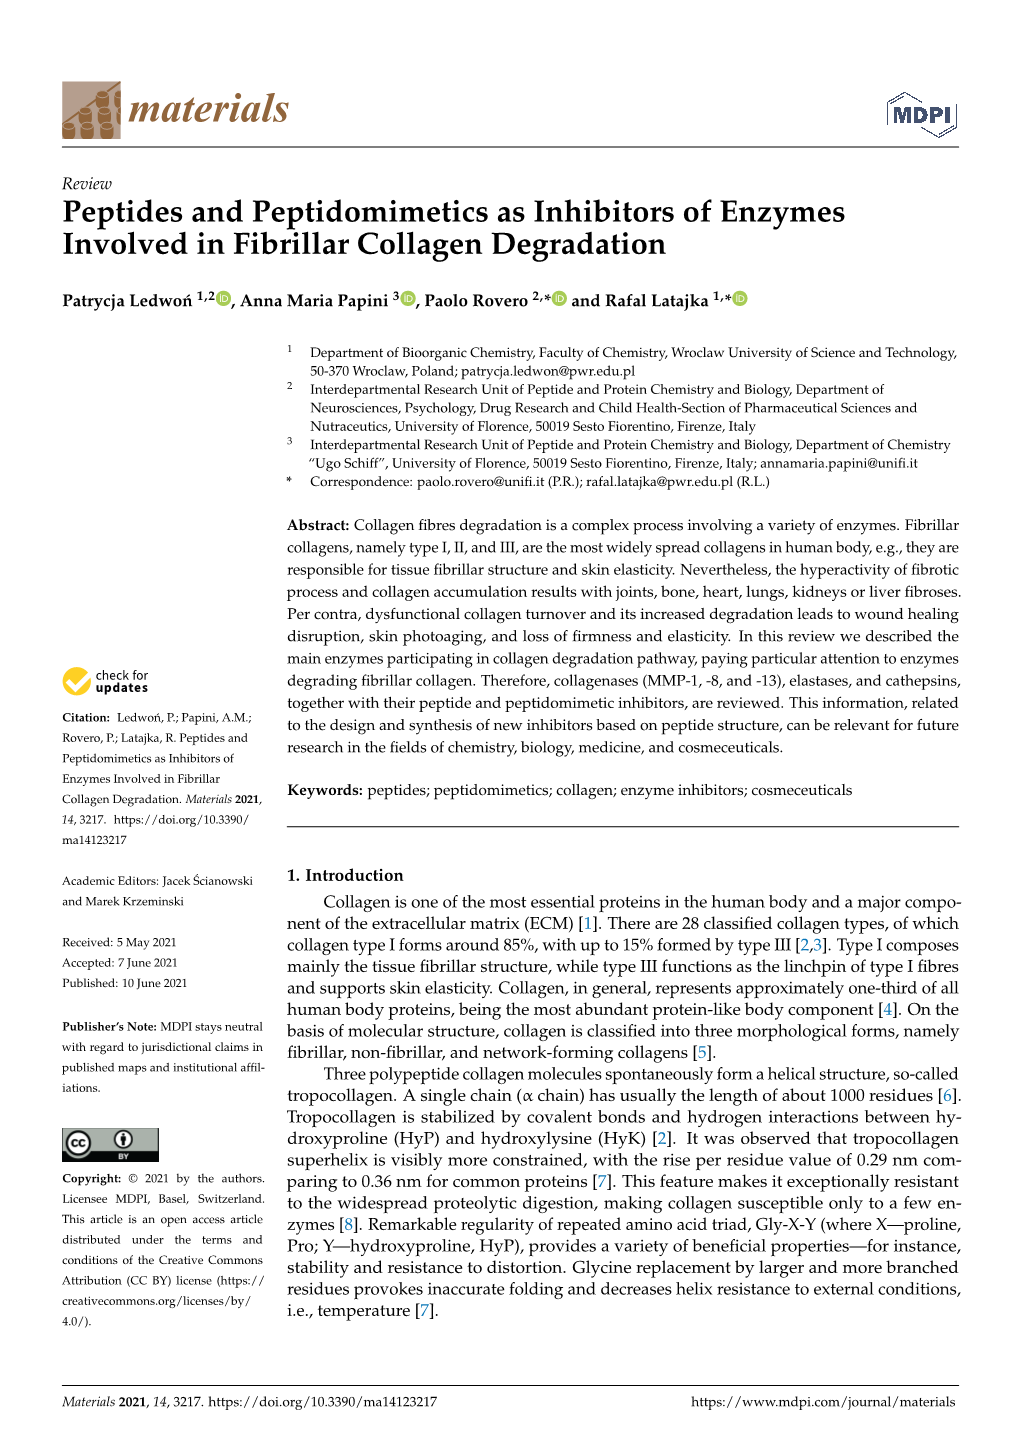 Peptides and Peptidomimetics As Inhibitors of Enzymes Involved in Fibrillar Collagen Degradation